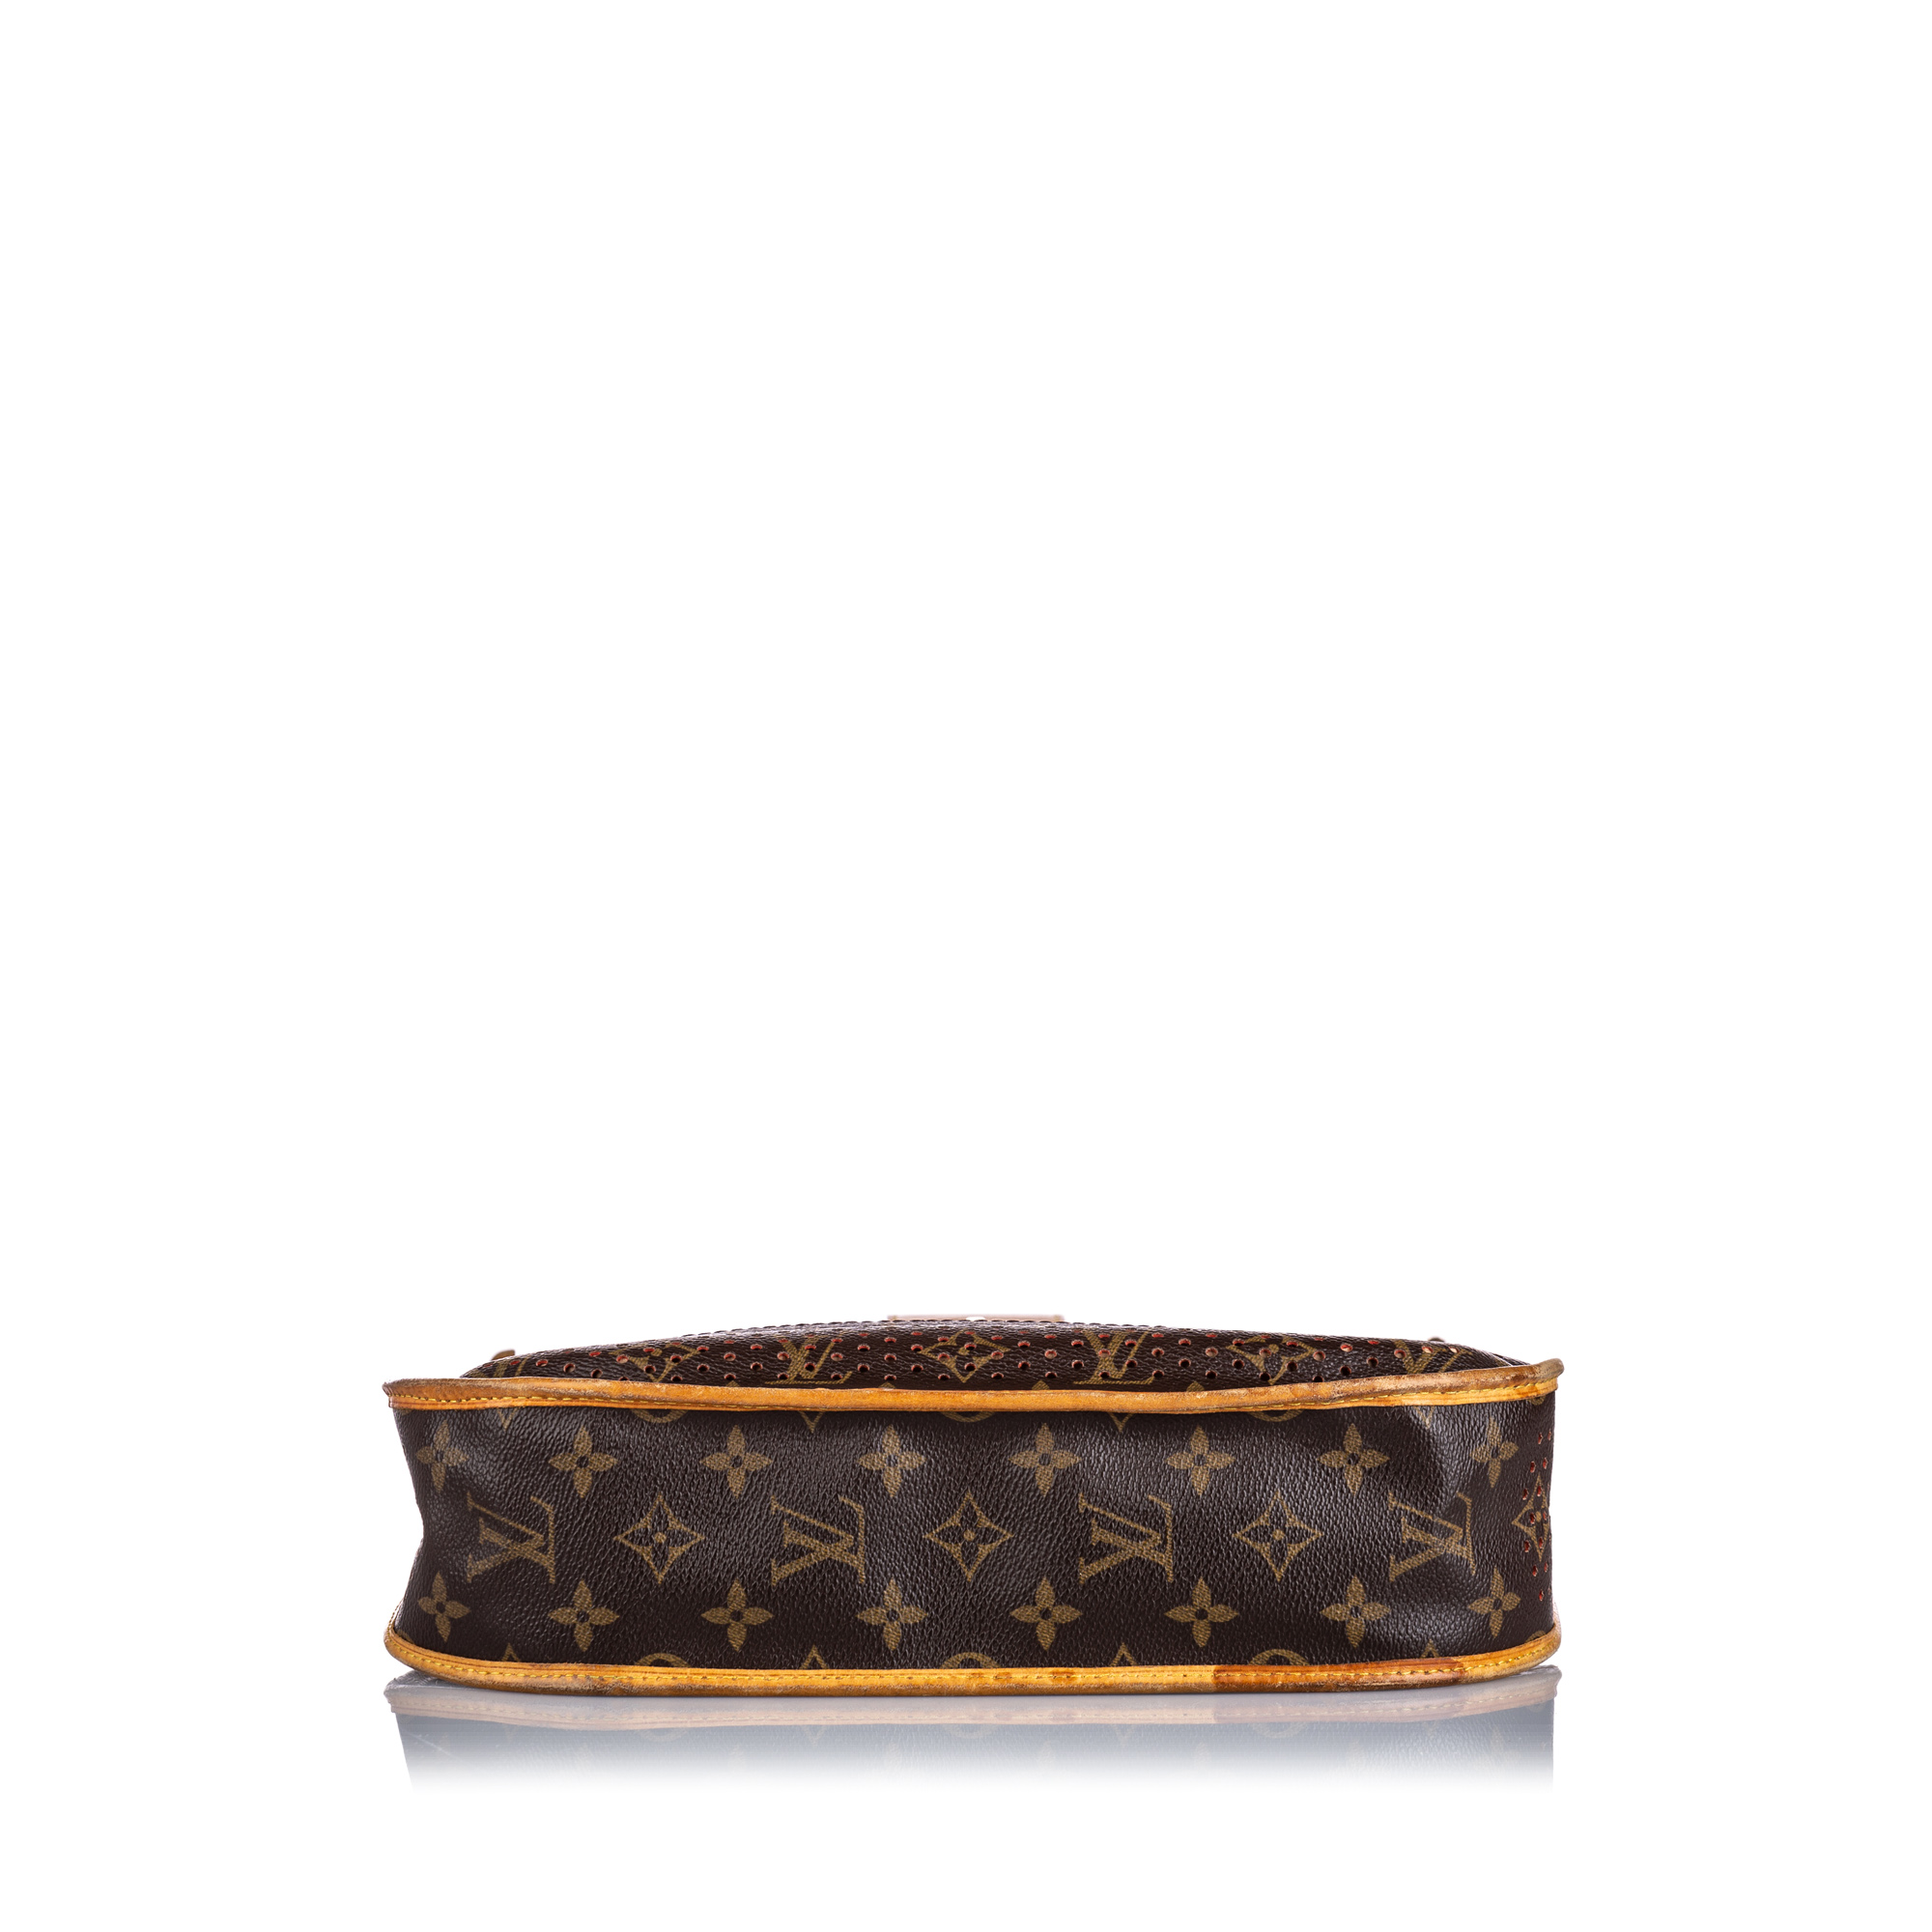 LOUIS VUITTON Limited Edition Perforated Musette Bag (Monogram & Fuchs –  Pretty Things Hoarder